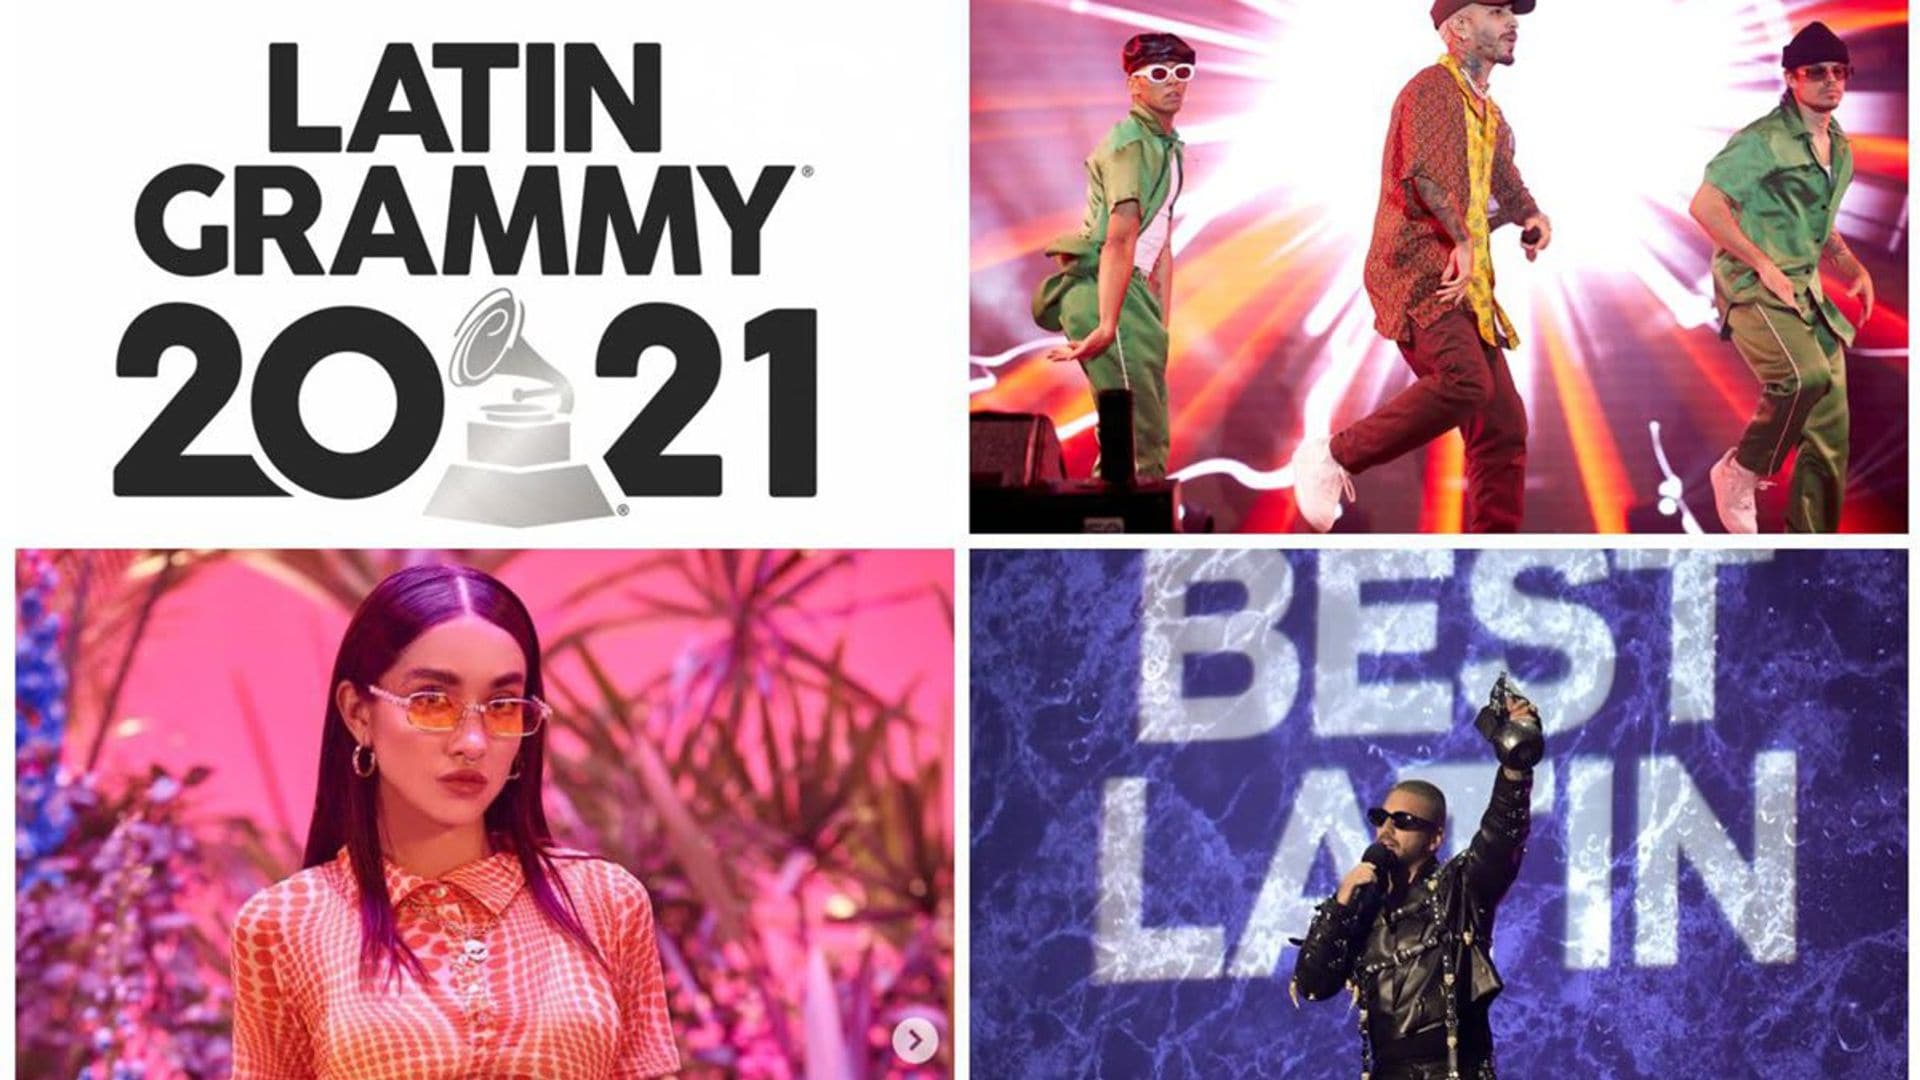 Latin Grammys 2021: Here is the complete list of nominees